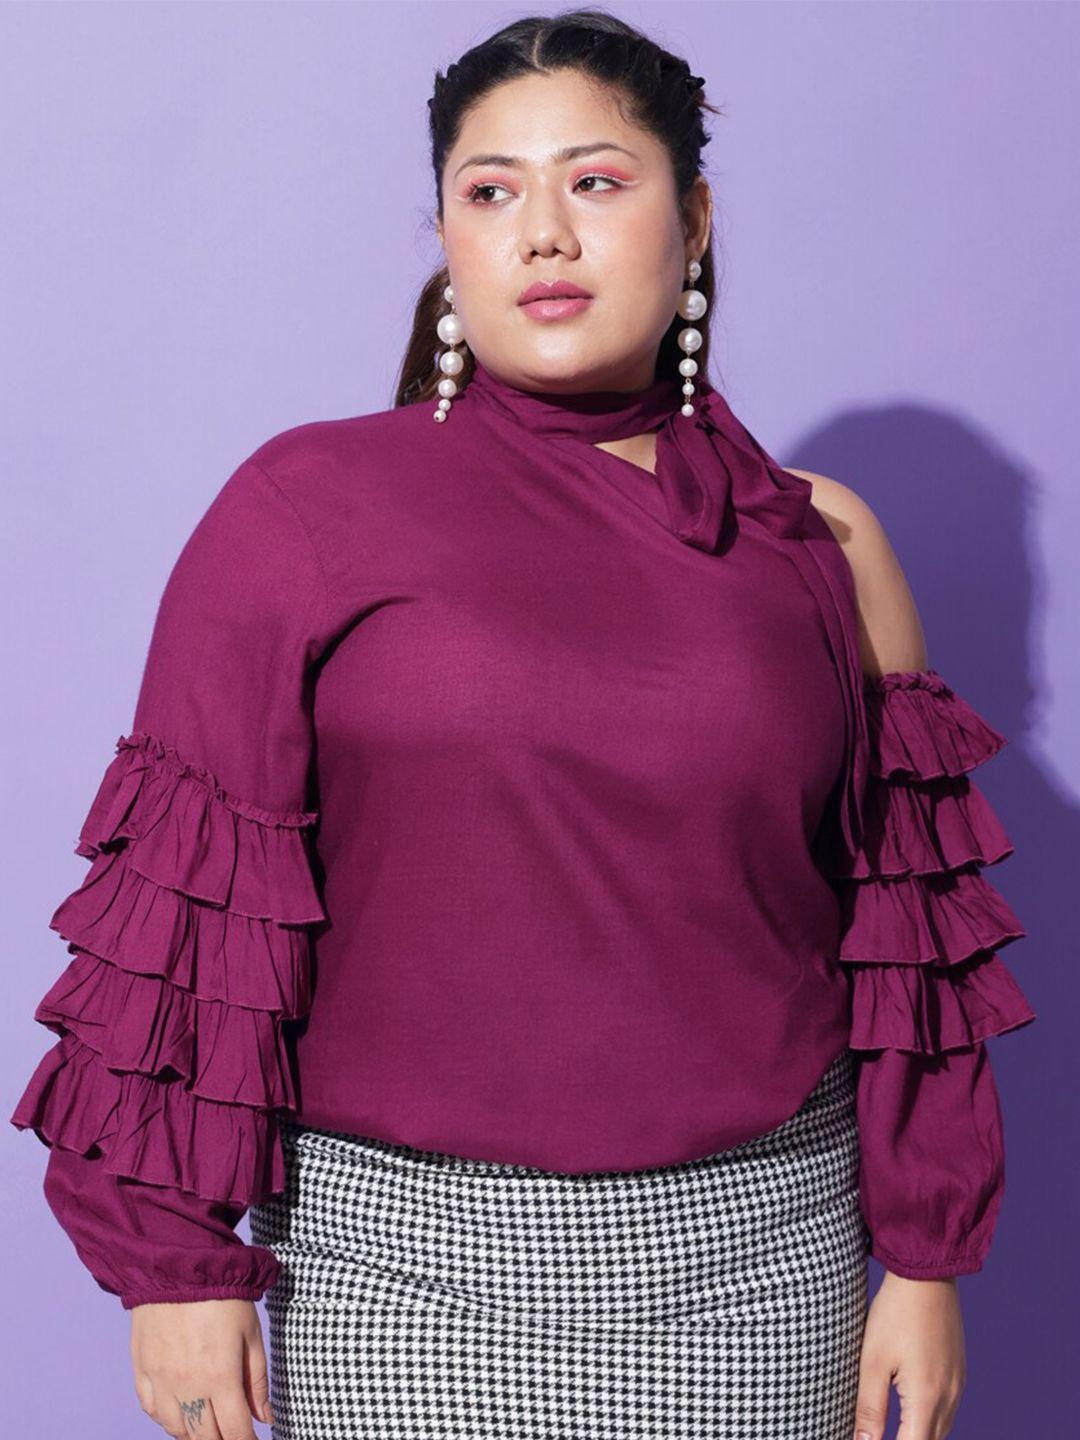 beyound size - the dry state plus size purple ruffles top